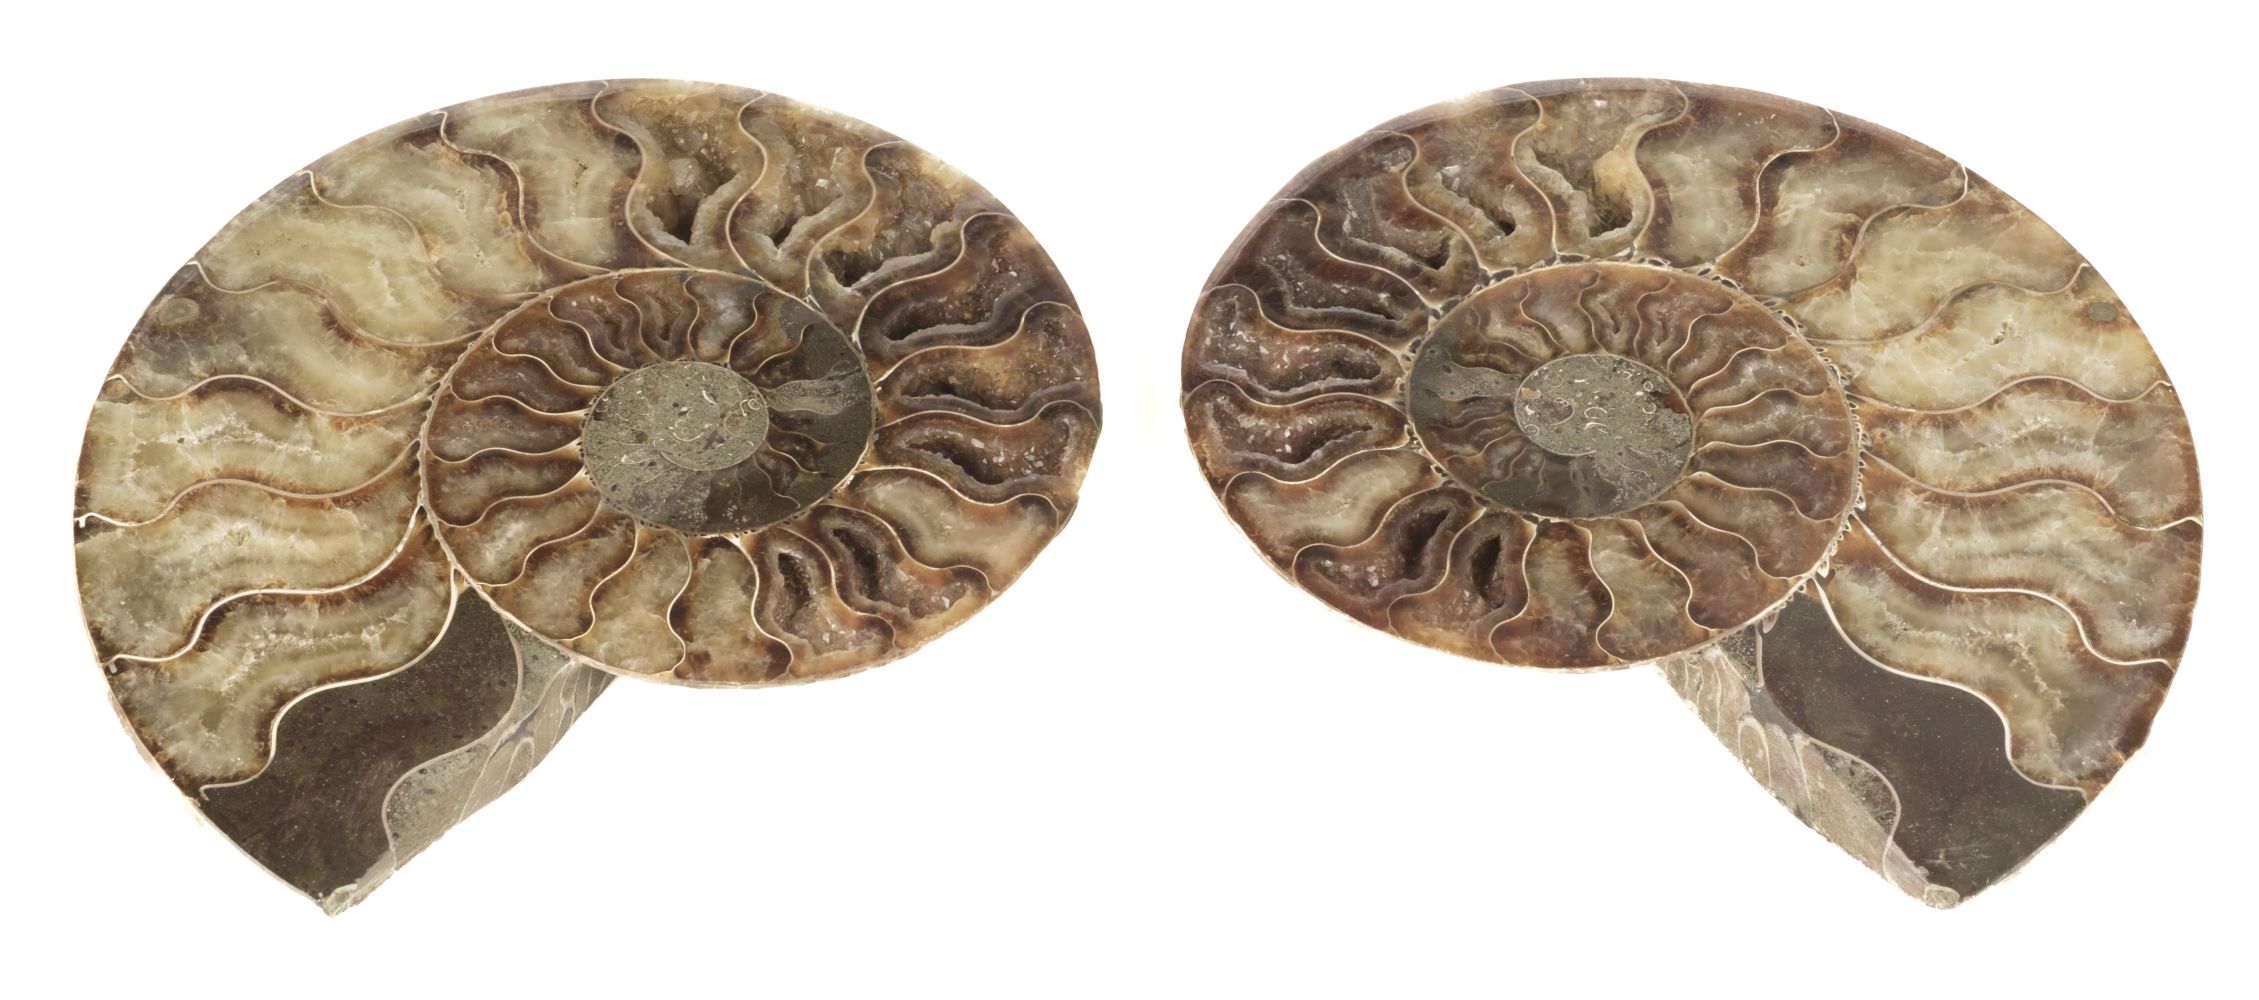 * Cleoniceras. A fine Ammonite, cut through its centre and polished